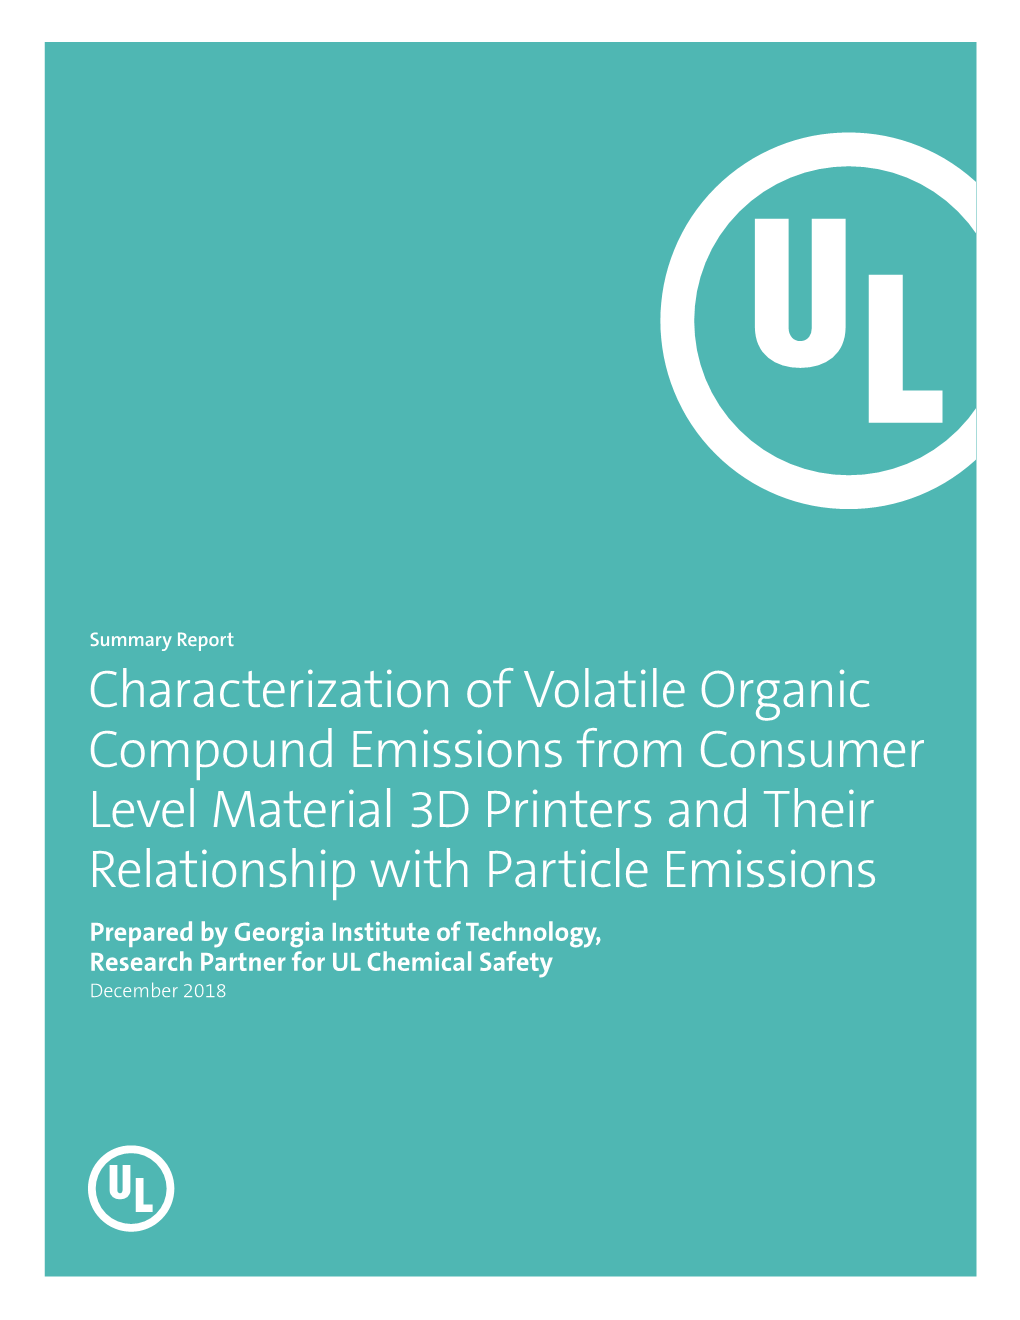 Characterization of Volatile Organic Compound Emissions From